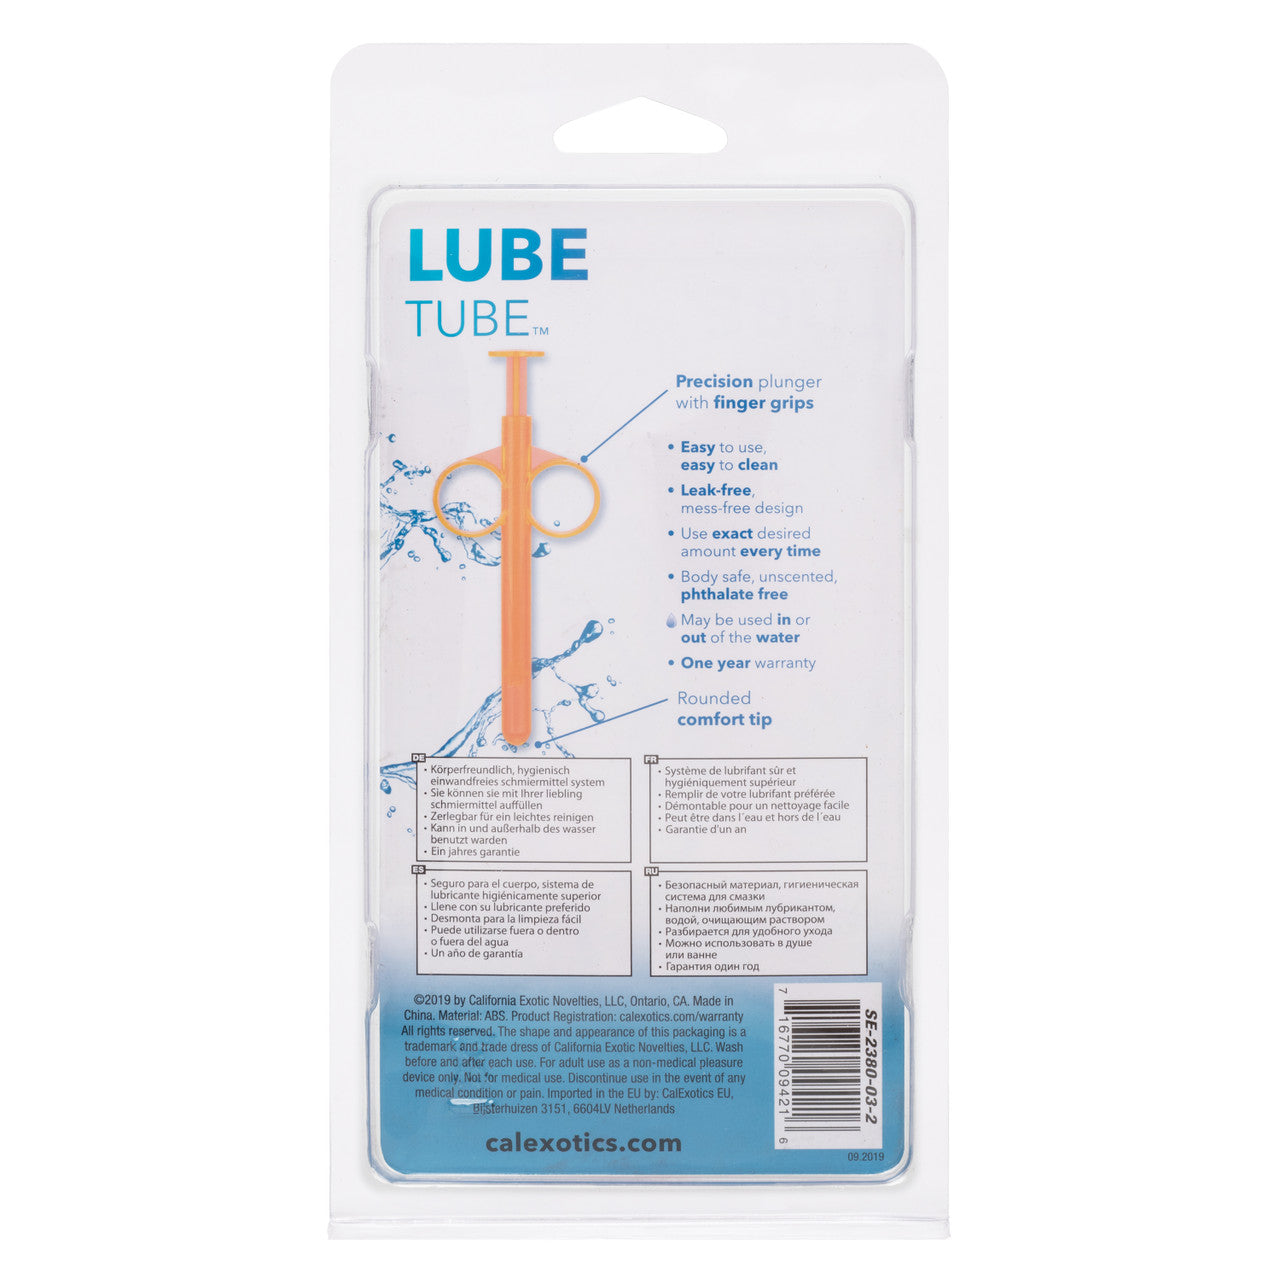 Lube Tube Applicator 2 Pack - Orange - Thorn & Feather